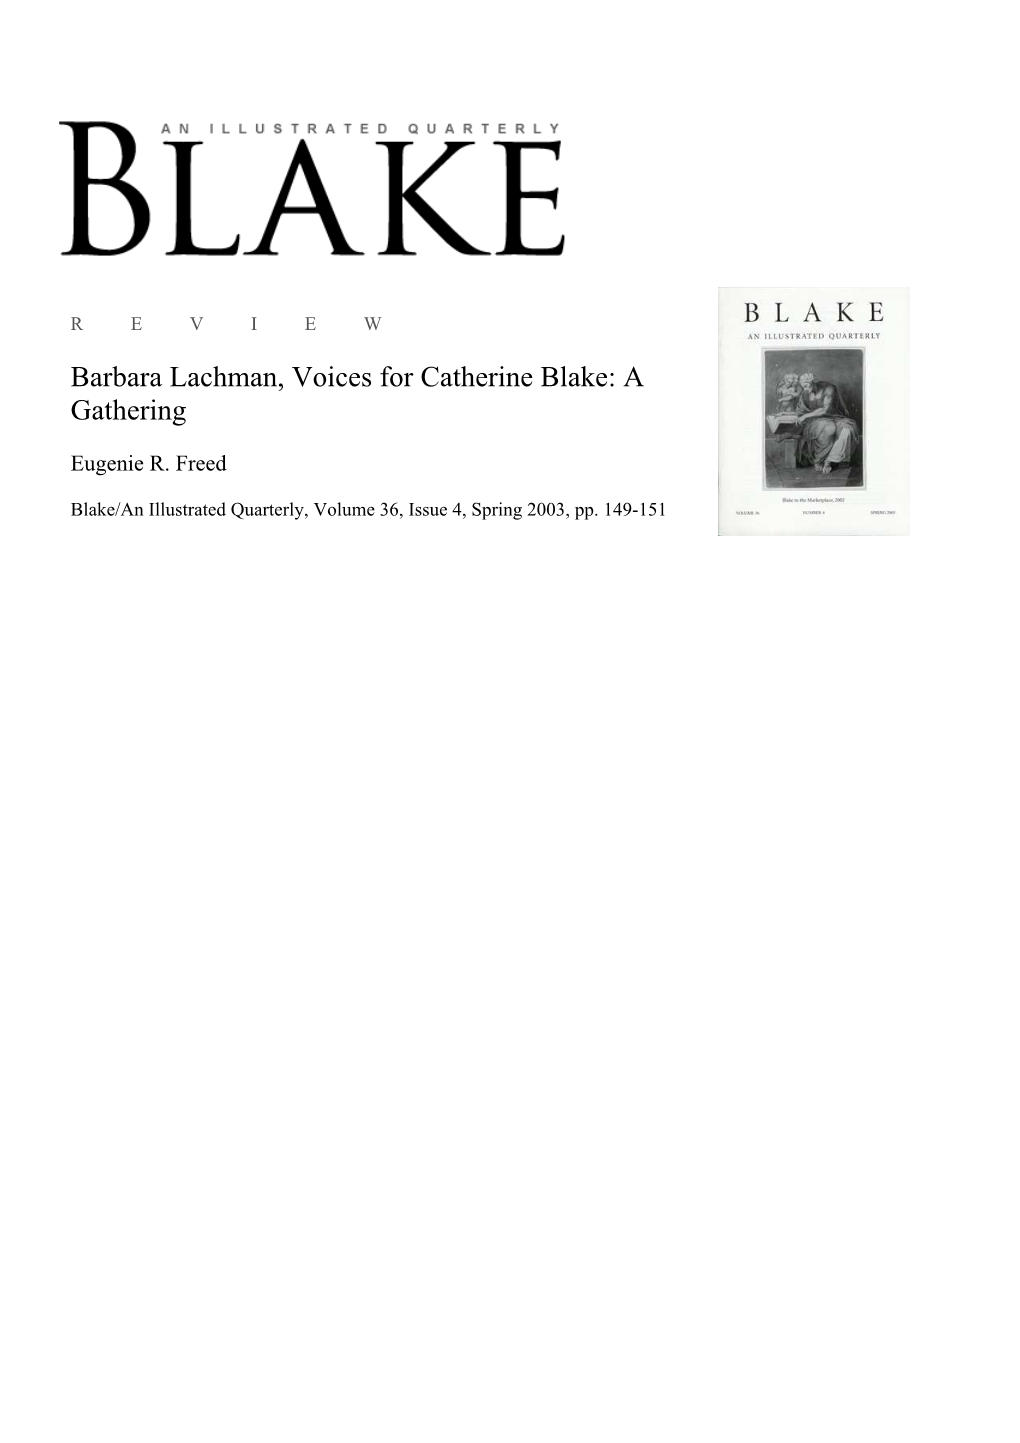 Barbara Lachman, Voices for Catherine Blake: a Gathering